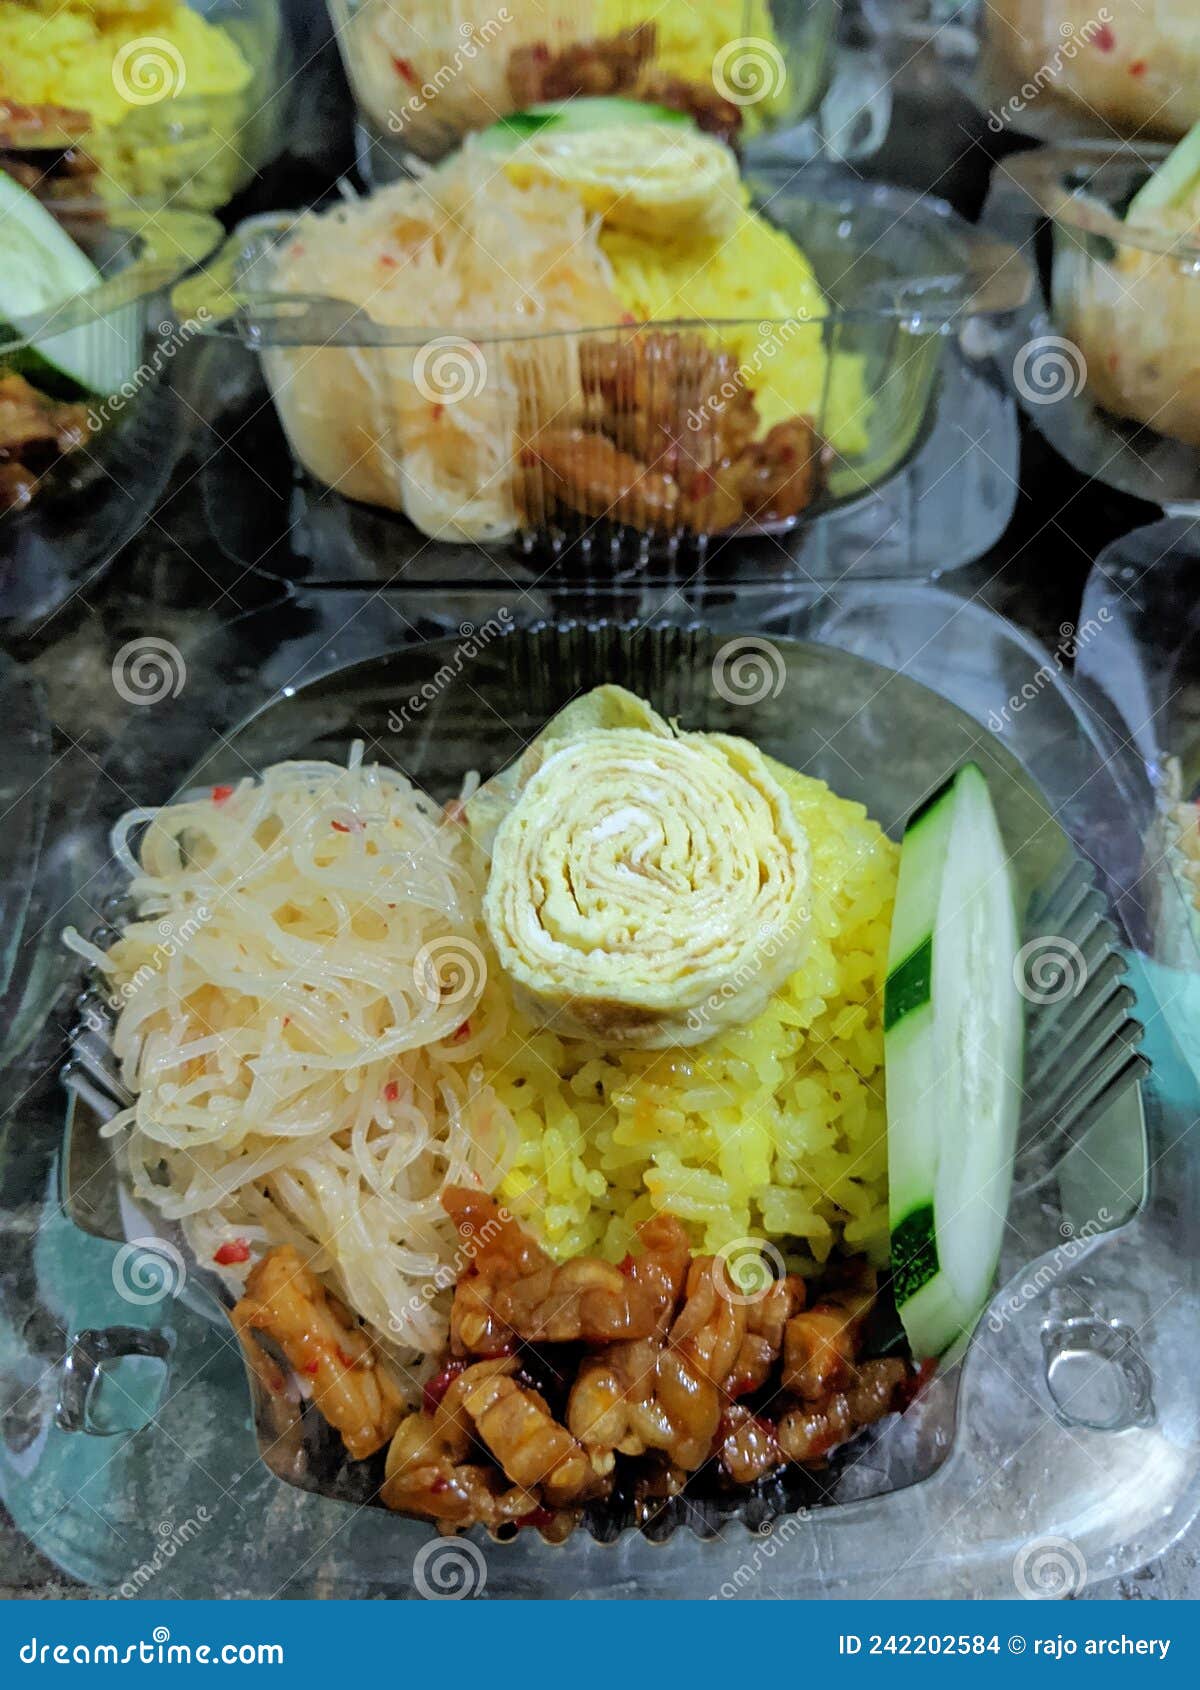 Packaged Yellow Rice Ready To Be Delivered To the Buyer Stock Photo ...